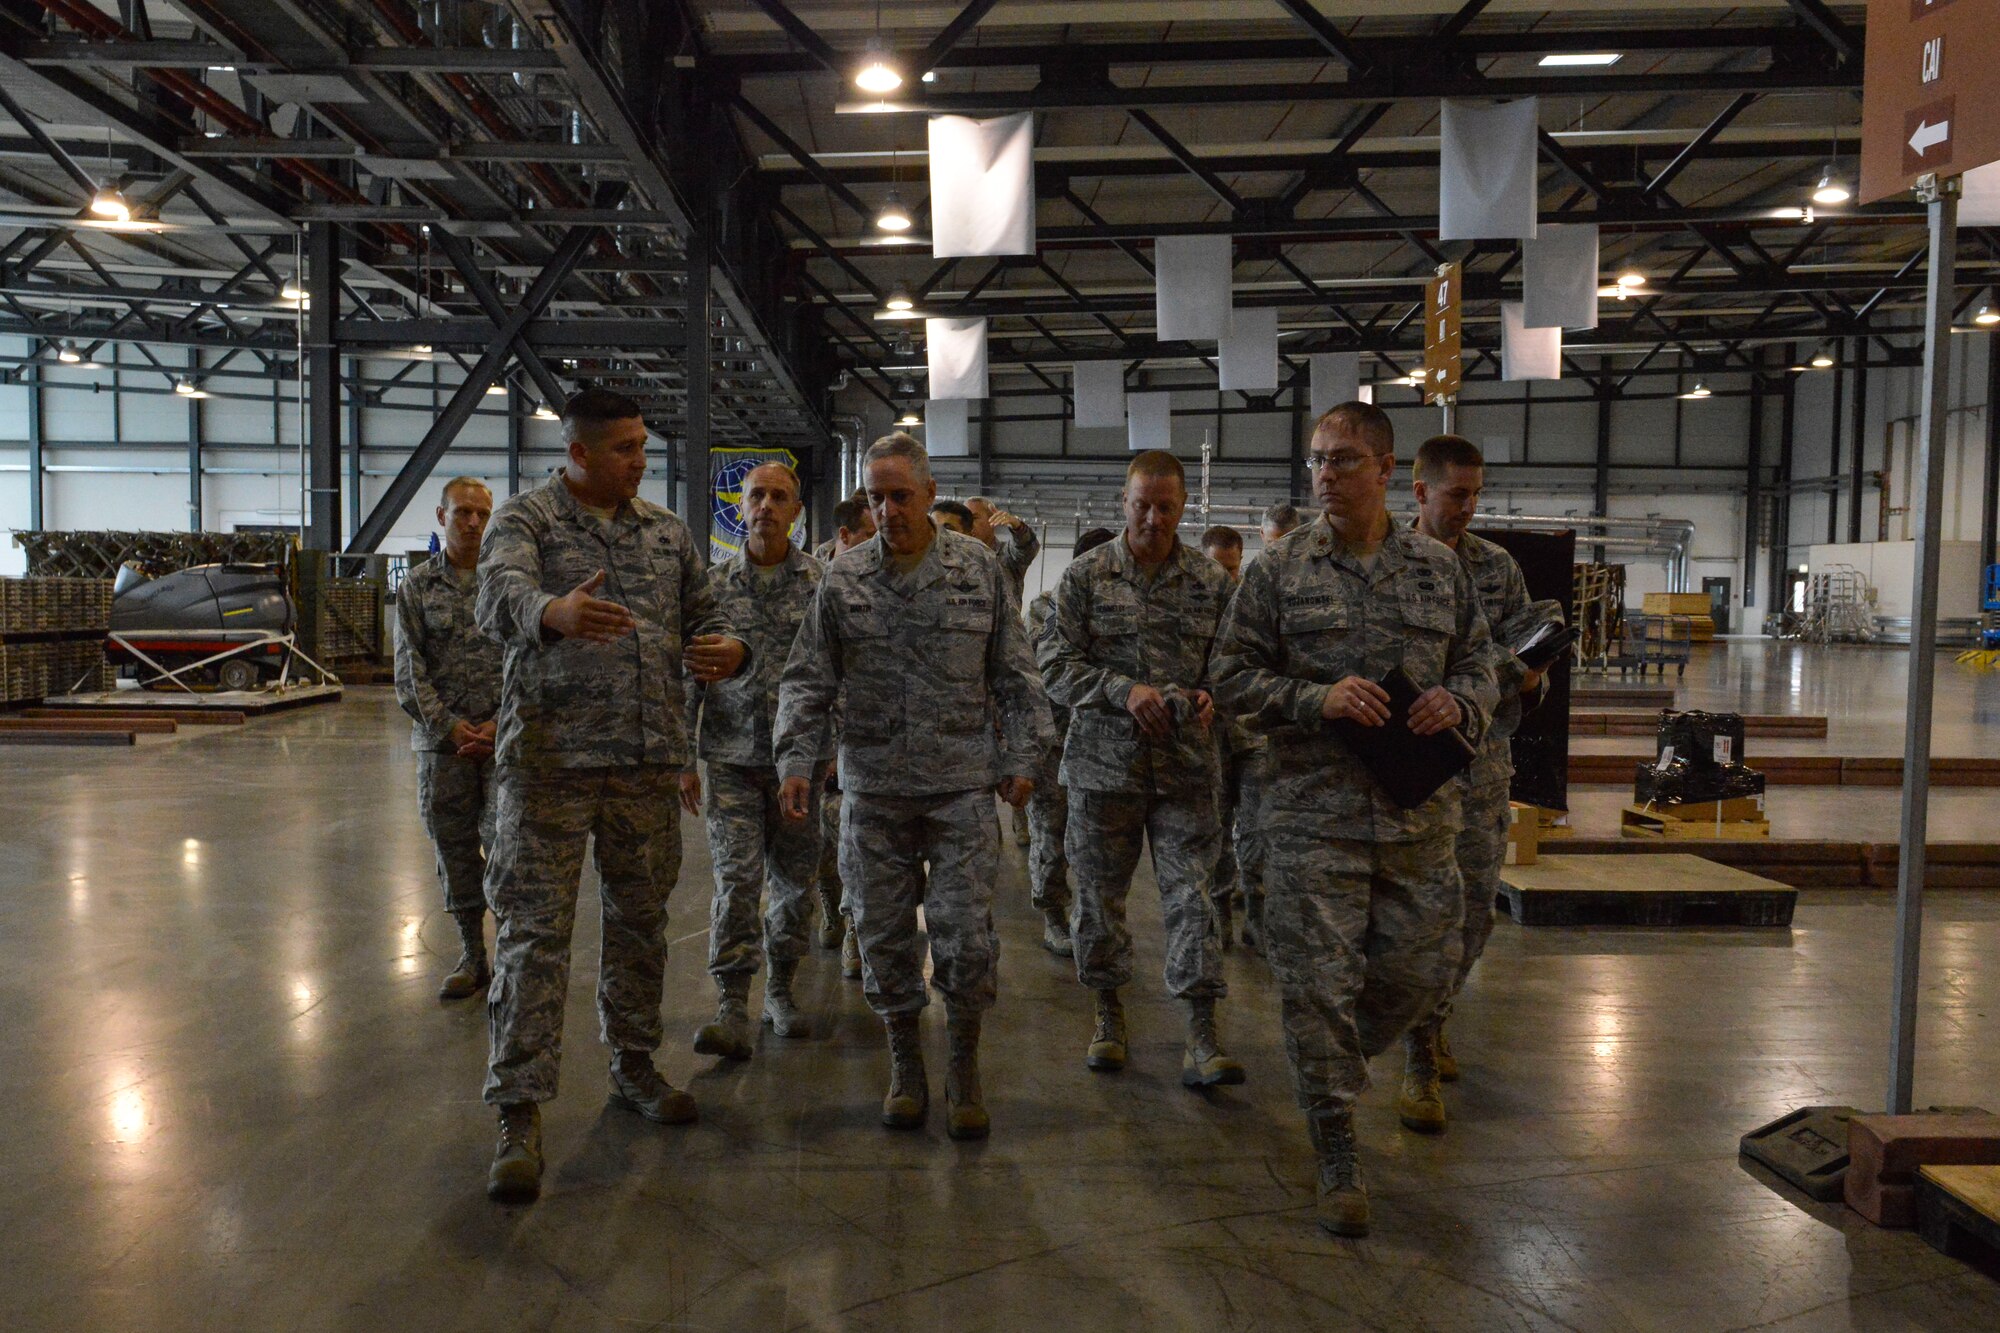 Maj. Gen. Frederick H. Rick Martin, U.S. Air Force Expeditionary Center commander, takes a tour of the 721st Aerial Port Squadron Oct. 13, 2015, at Ramstein Air Base, Germany. During his visit, Martin toured different units from the 521st Air Mobility Operations Wing and spoke during an all-call. (U.S. Air Force photo/Senior Airman Nicole Sikorski) 